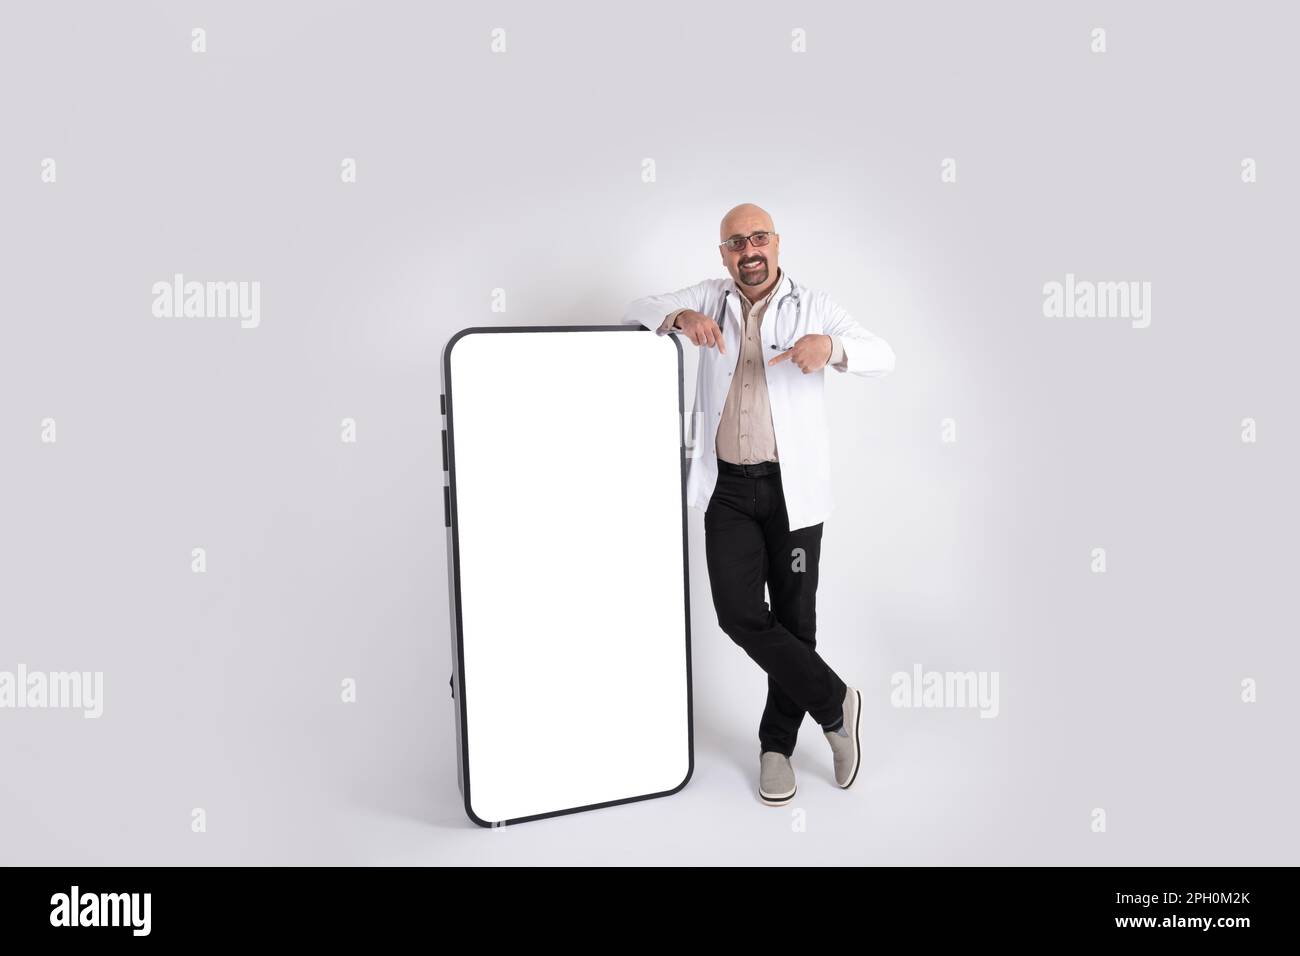 Bald underweight male doctor leaning big phone. Full body length image of middle aged bald physician pointing empty screen smartphone, mock up. Stock Photo